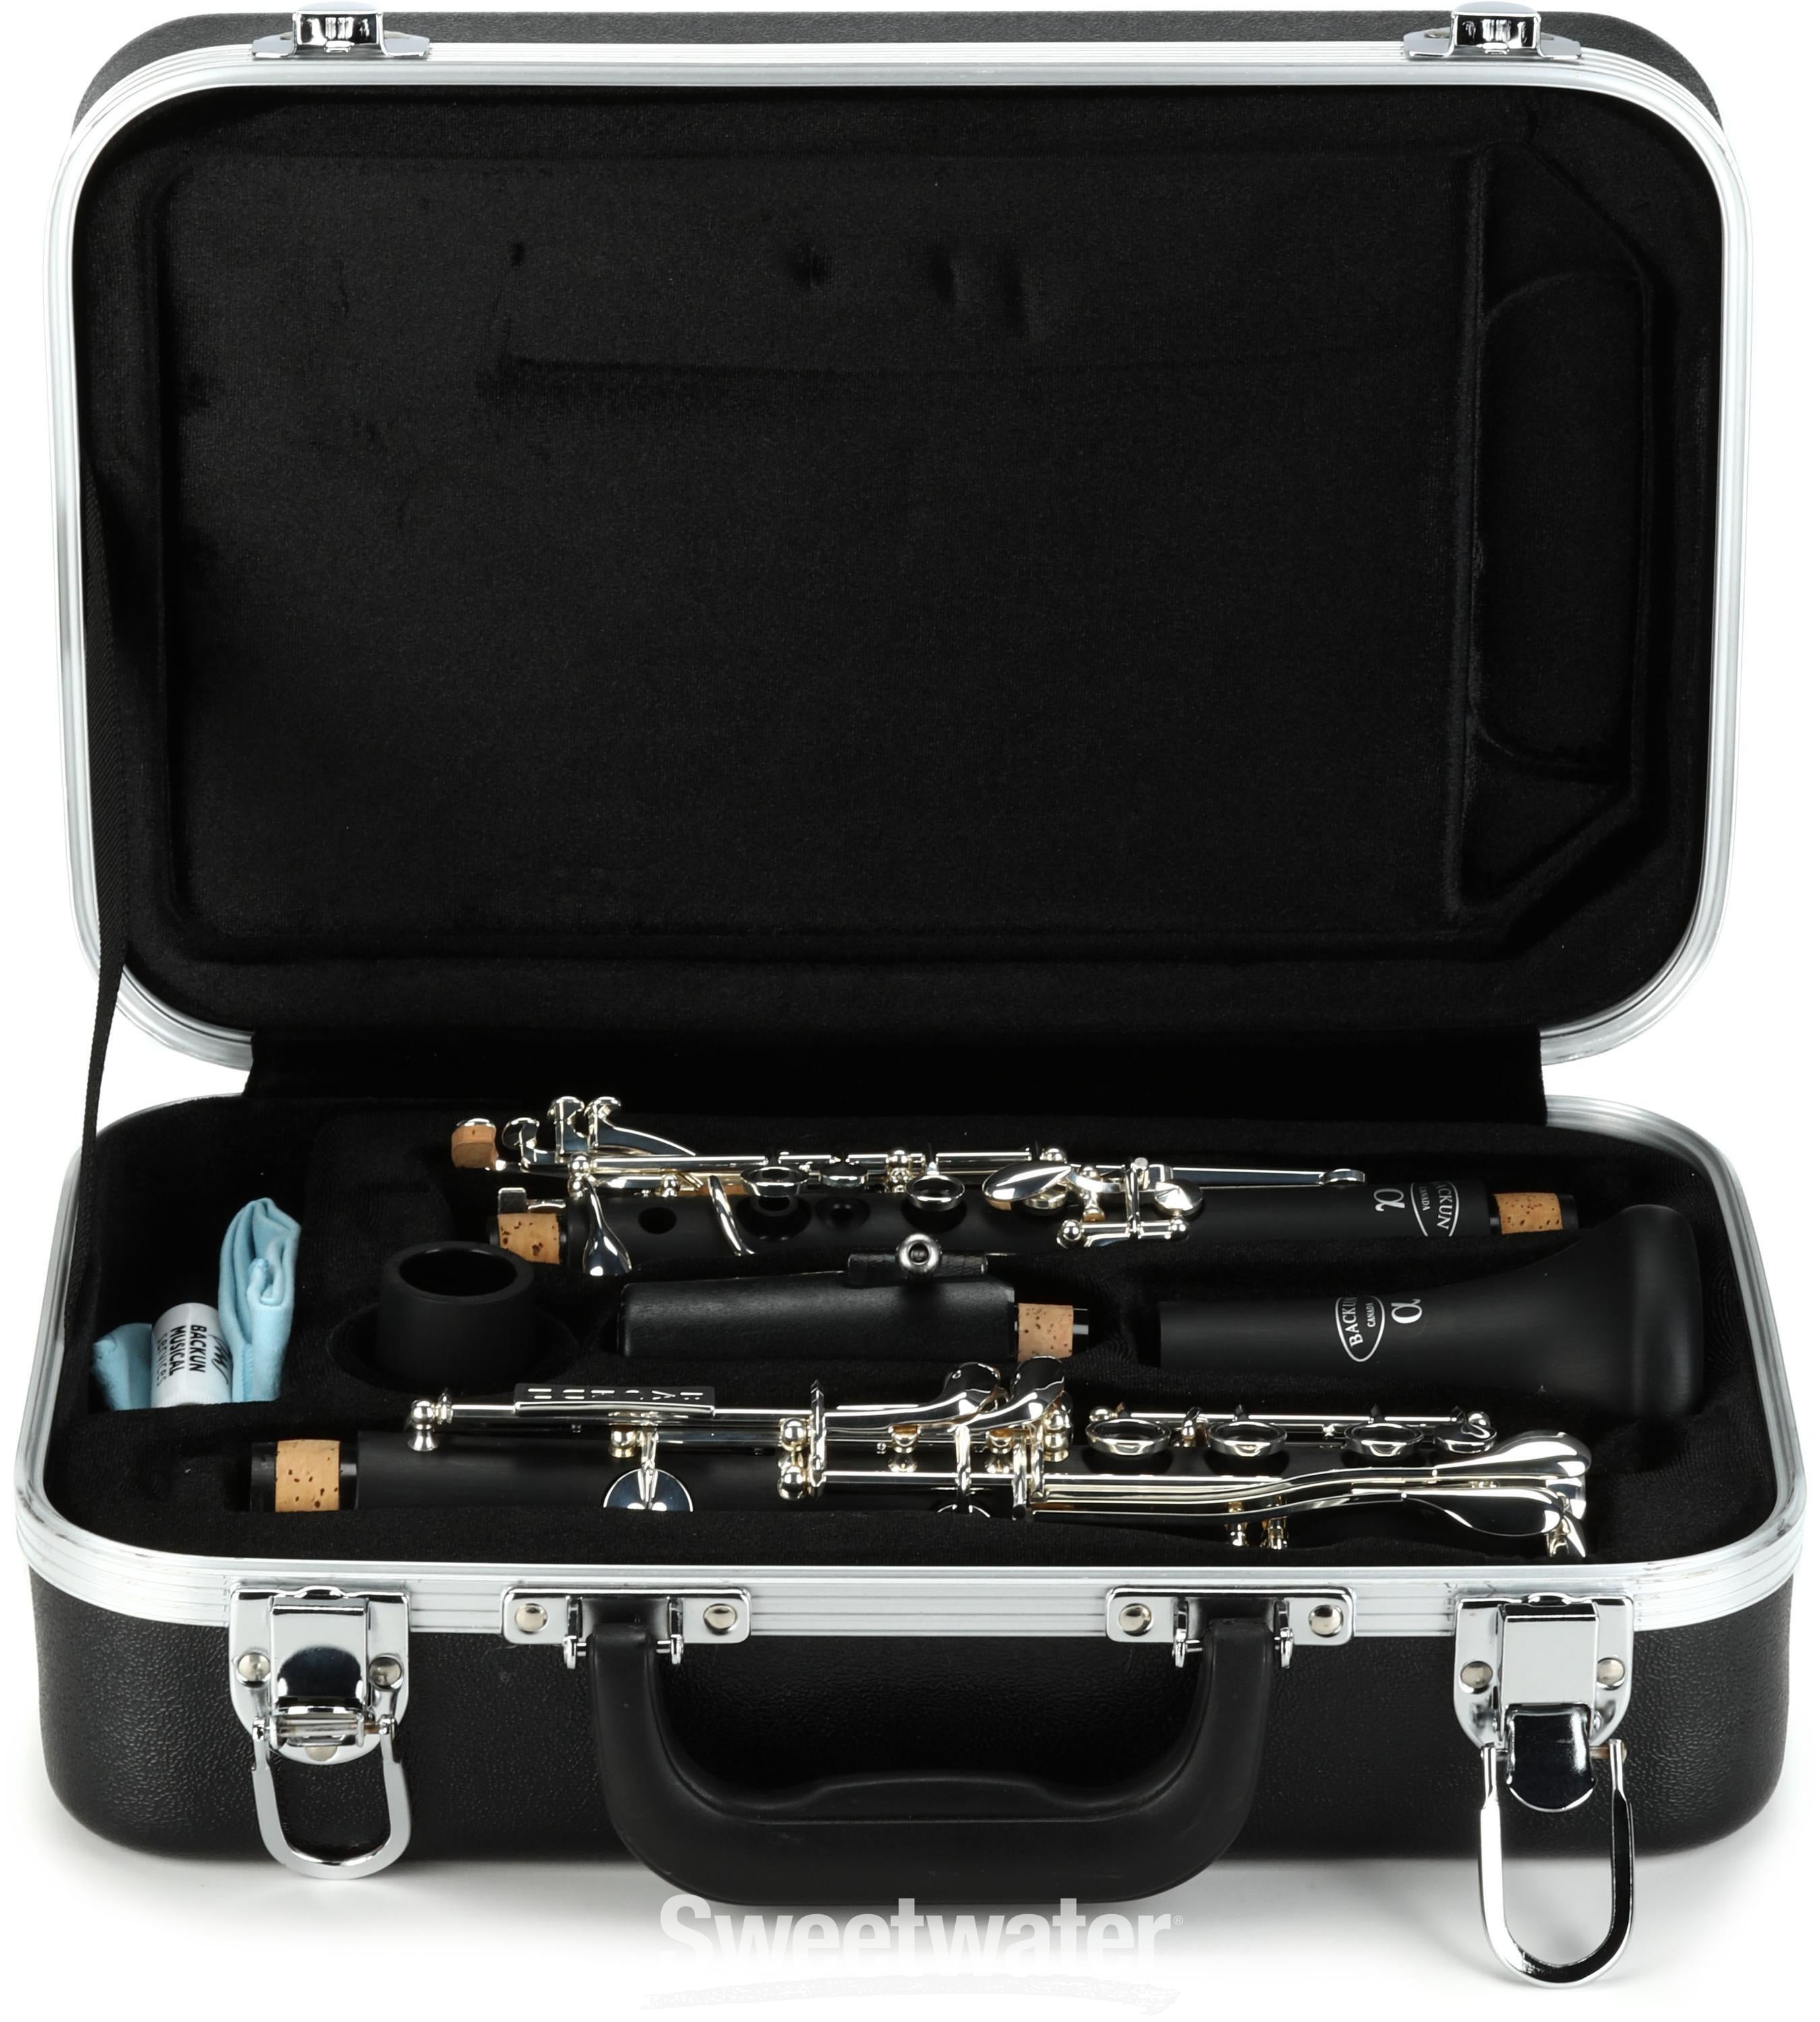 Backun Alpha Student Bb Clarinet with Silver-plated Keys Sweetwater